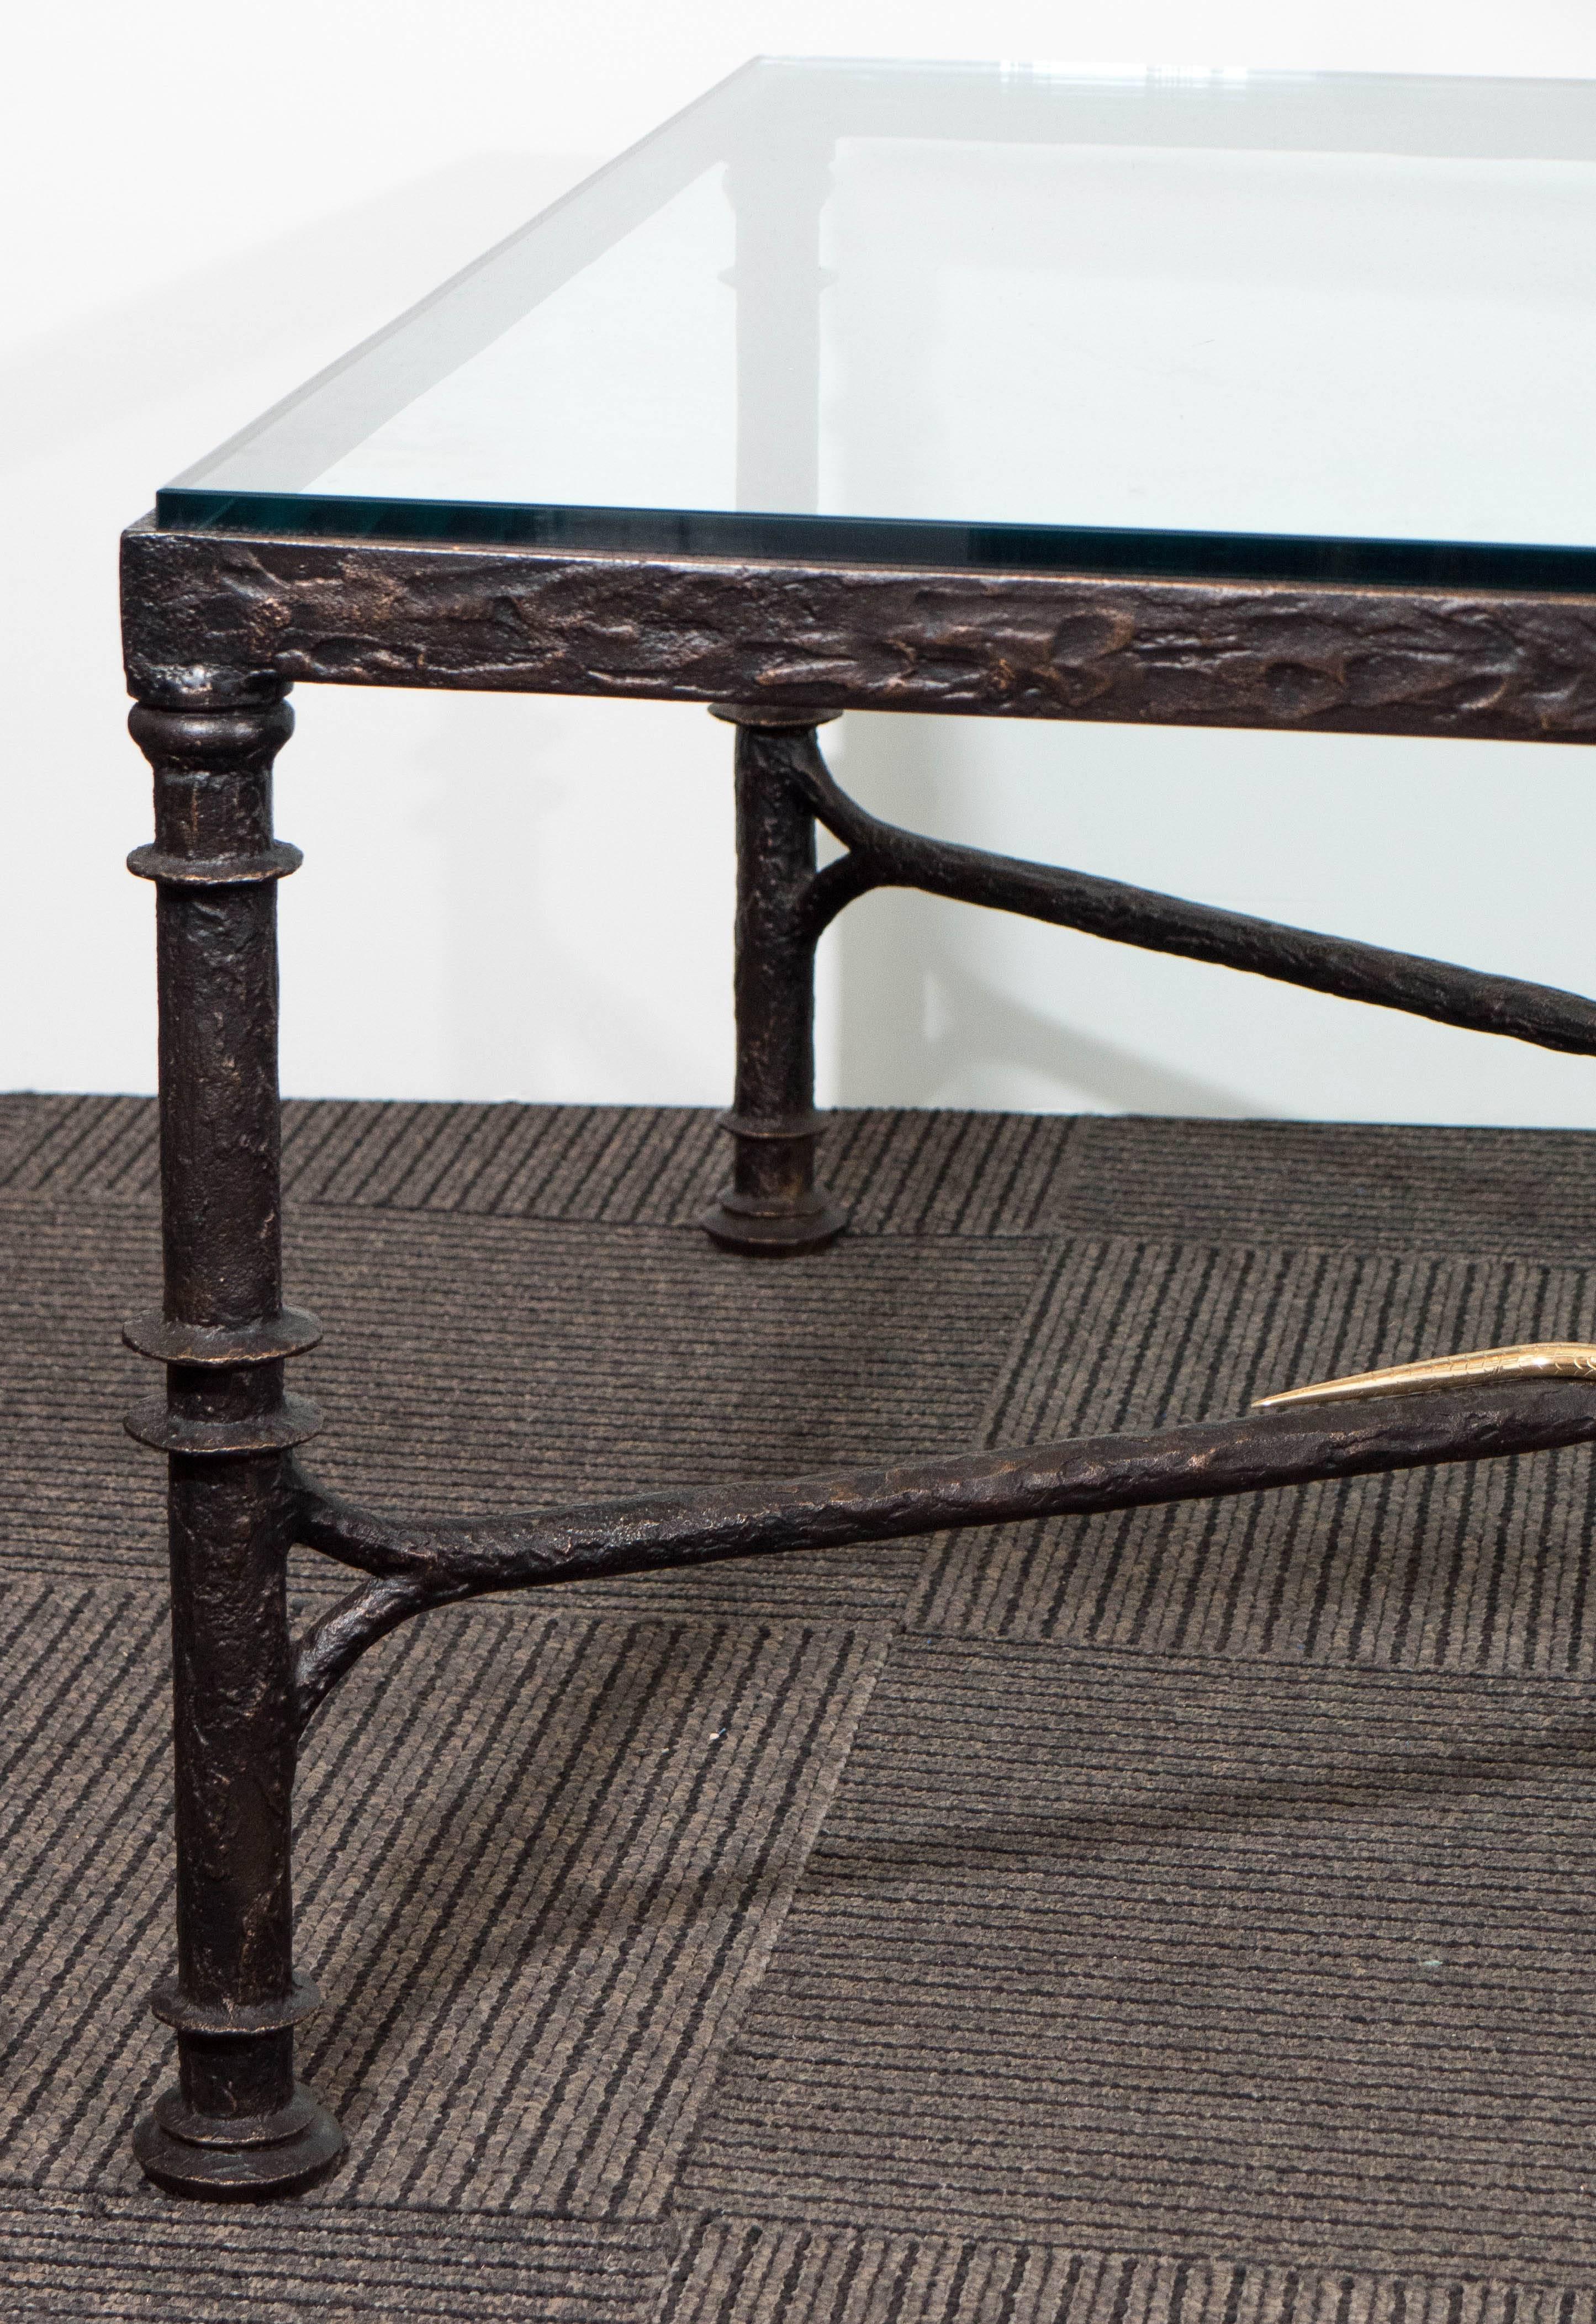 A stunning glass top low coffee table, created circa 1980s by designer Christopher Chodoff (1909-1990); the 'Etruscan' table, so called for the masterful rendering of the table's patinated cast bronze frame, includes a cross beam stretcher, artfully